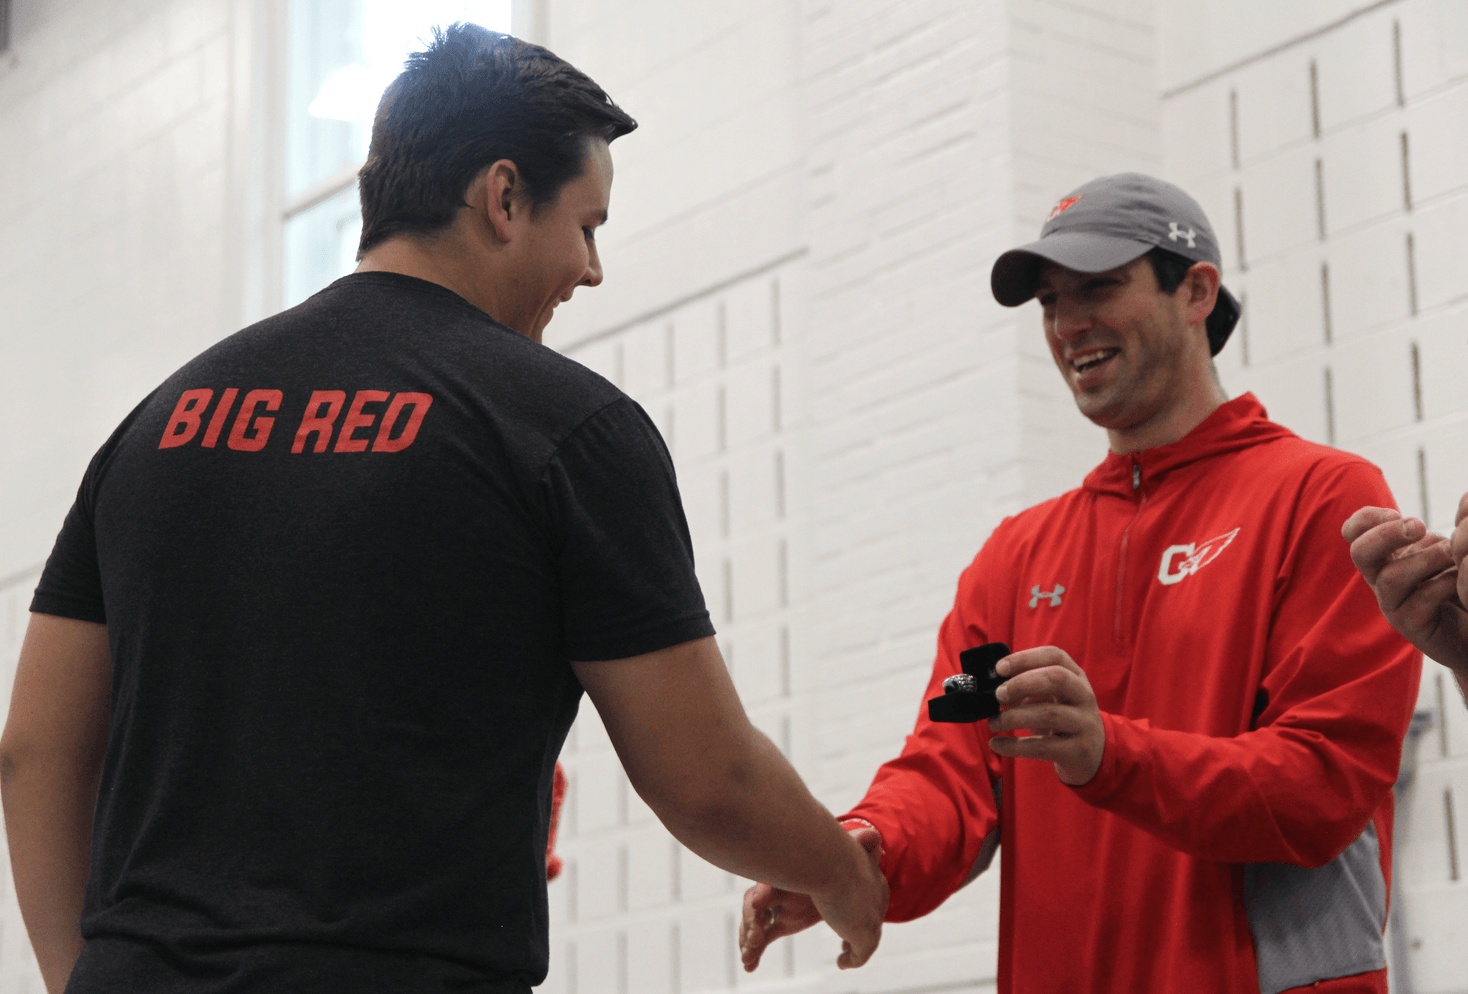 Following the clinic on the turf field at the Boys & Girls Club the Cardinals head coach presented rings during a ceremony in side the field house, a new tradition for the team. May 19, 2019 Photo: Leslie Yager